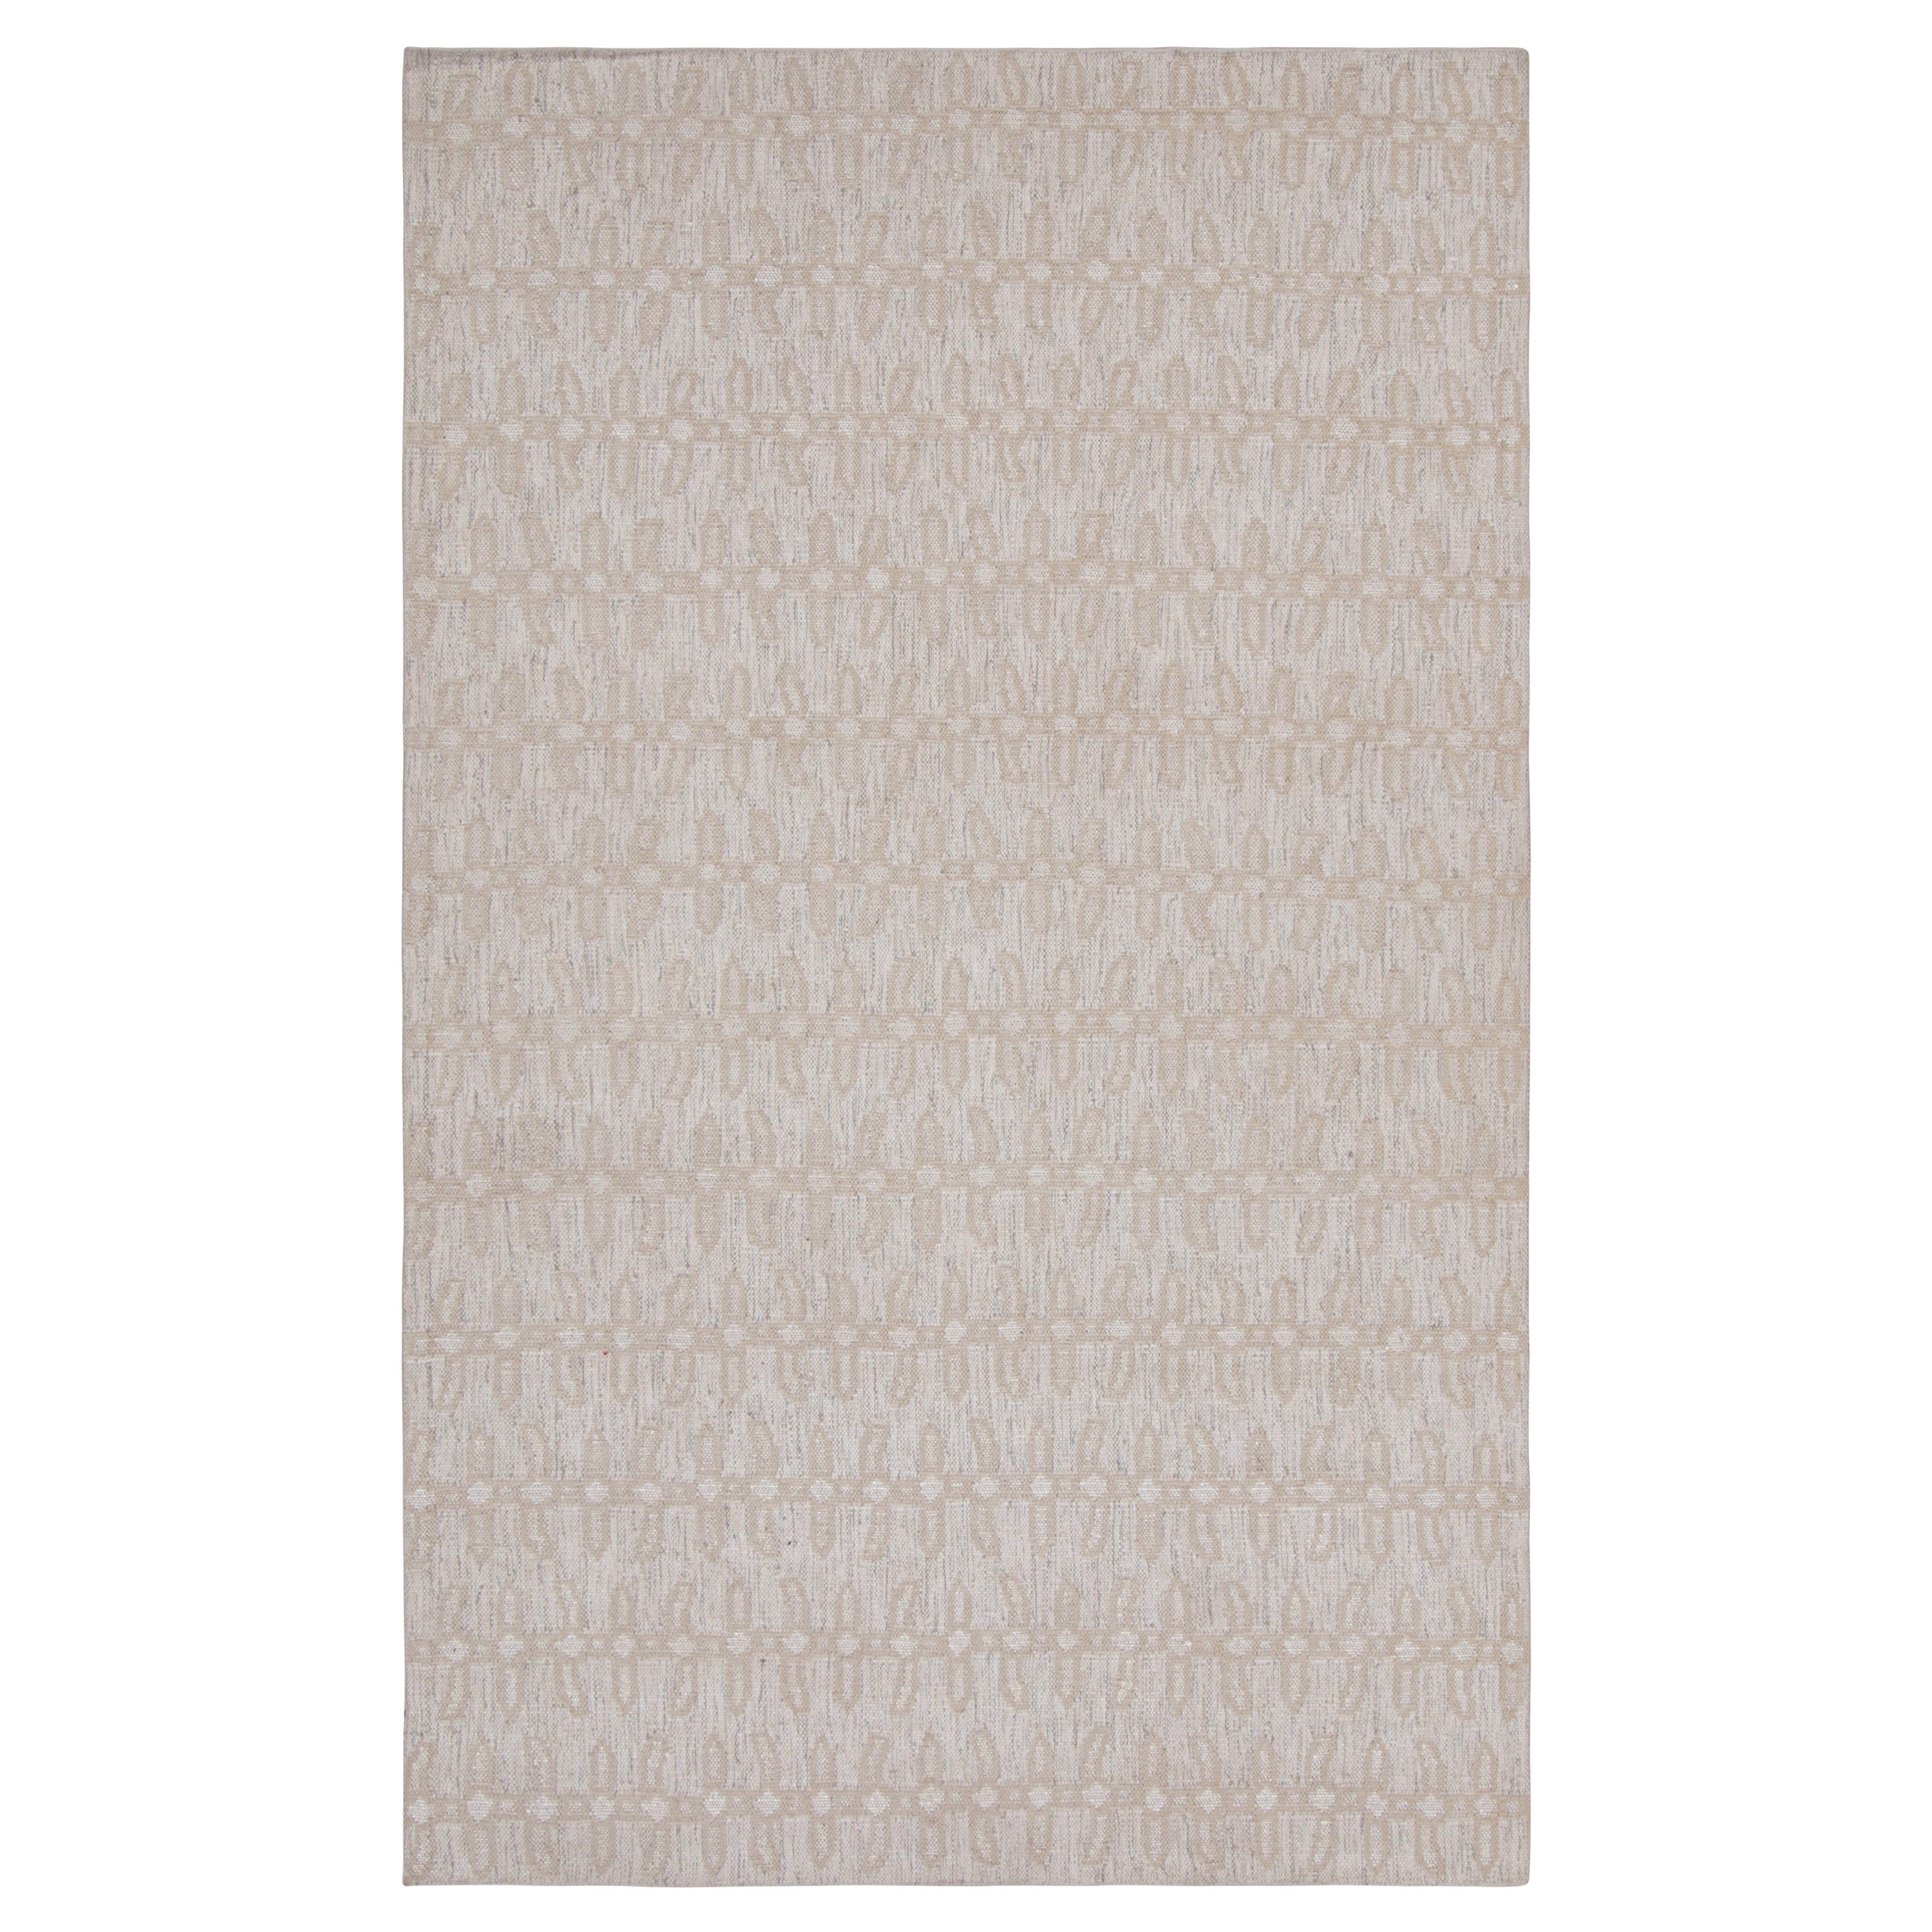 Rug & Kilim’s Scandinavian Style Rug in White with Floral Patterns For Sale